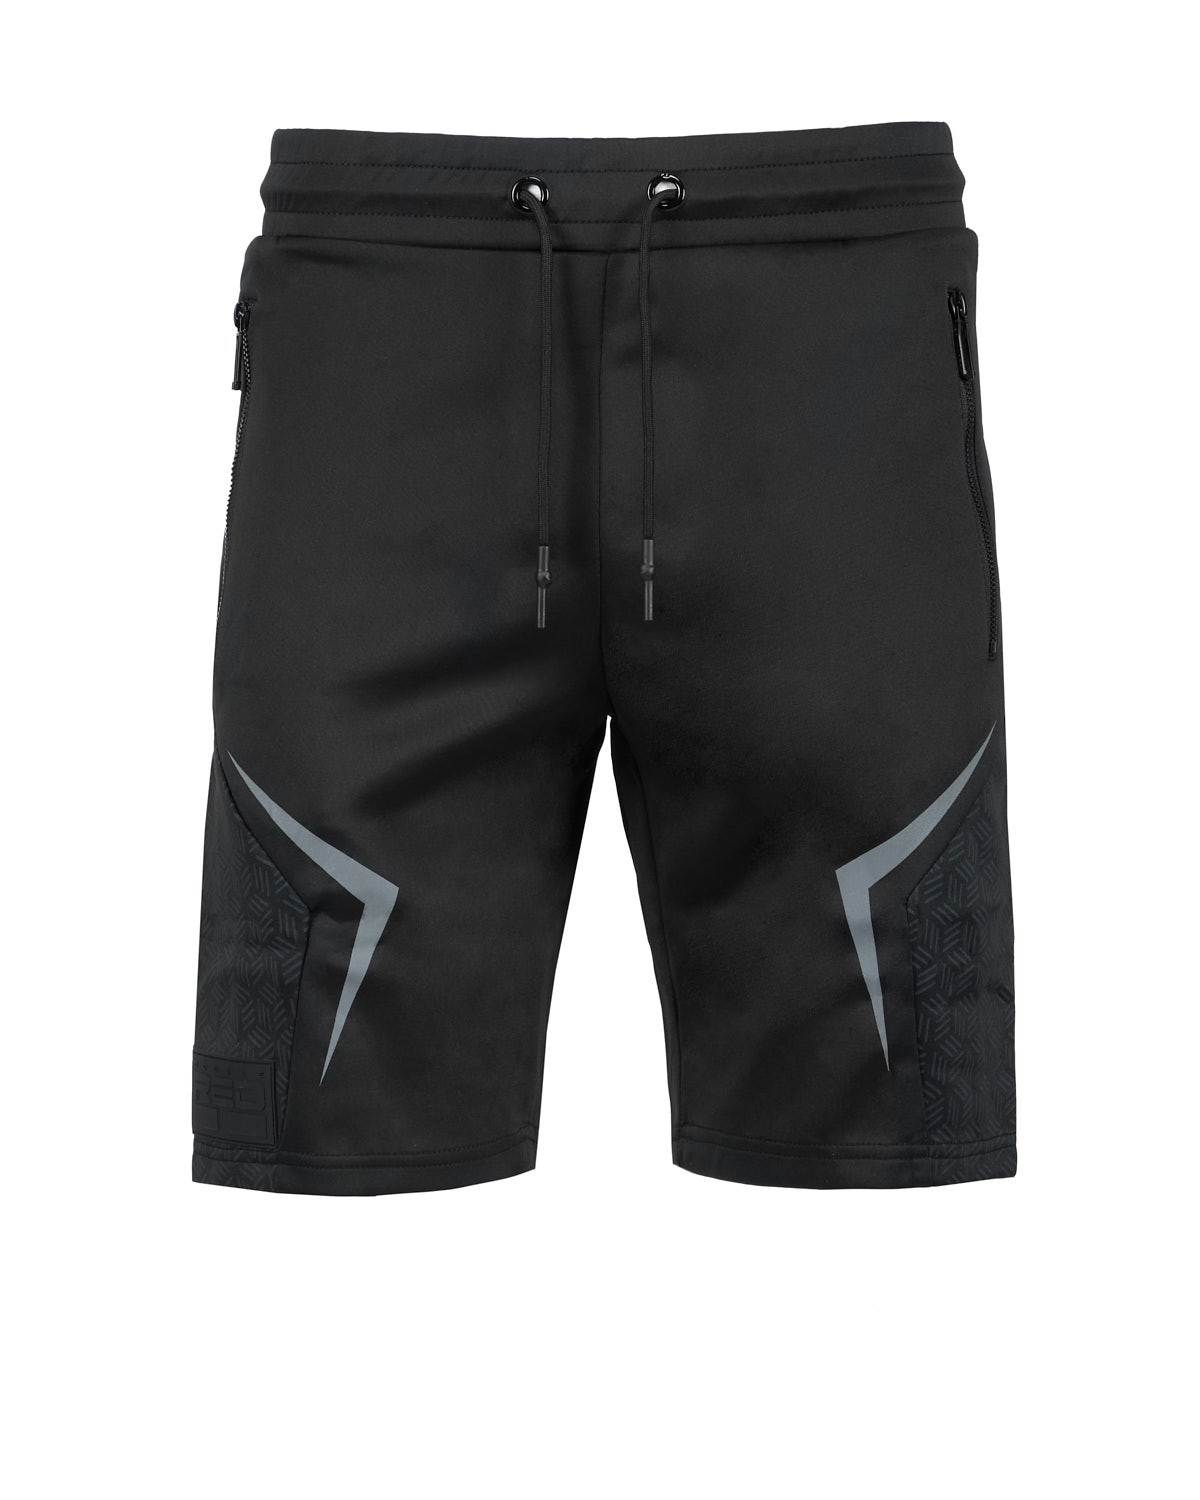 REFLEXERO SPORT IS YOUR GANG All Black Edition Shorts